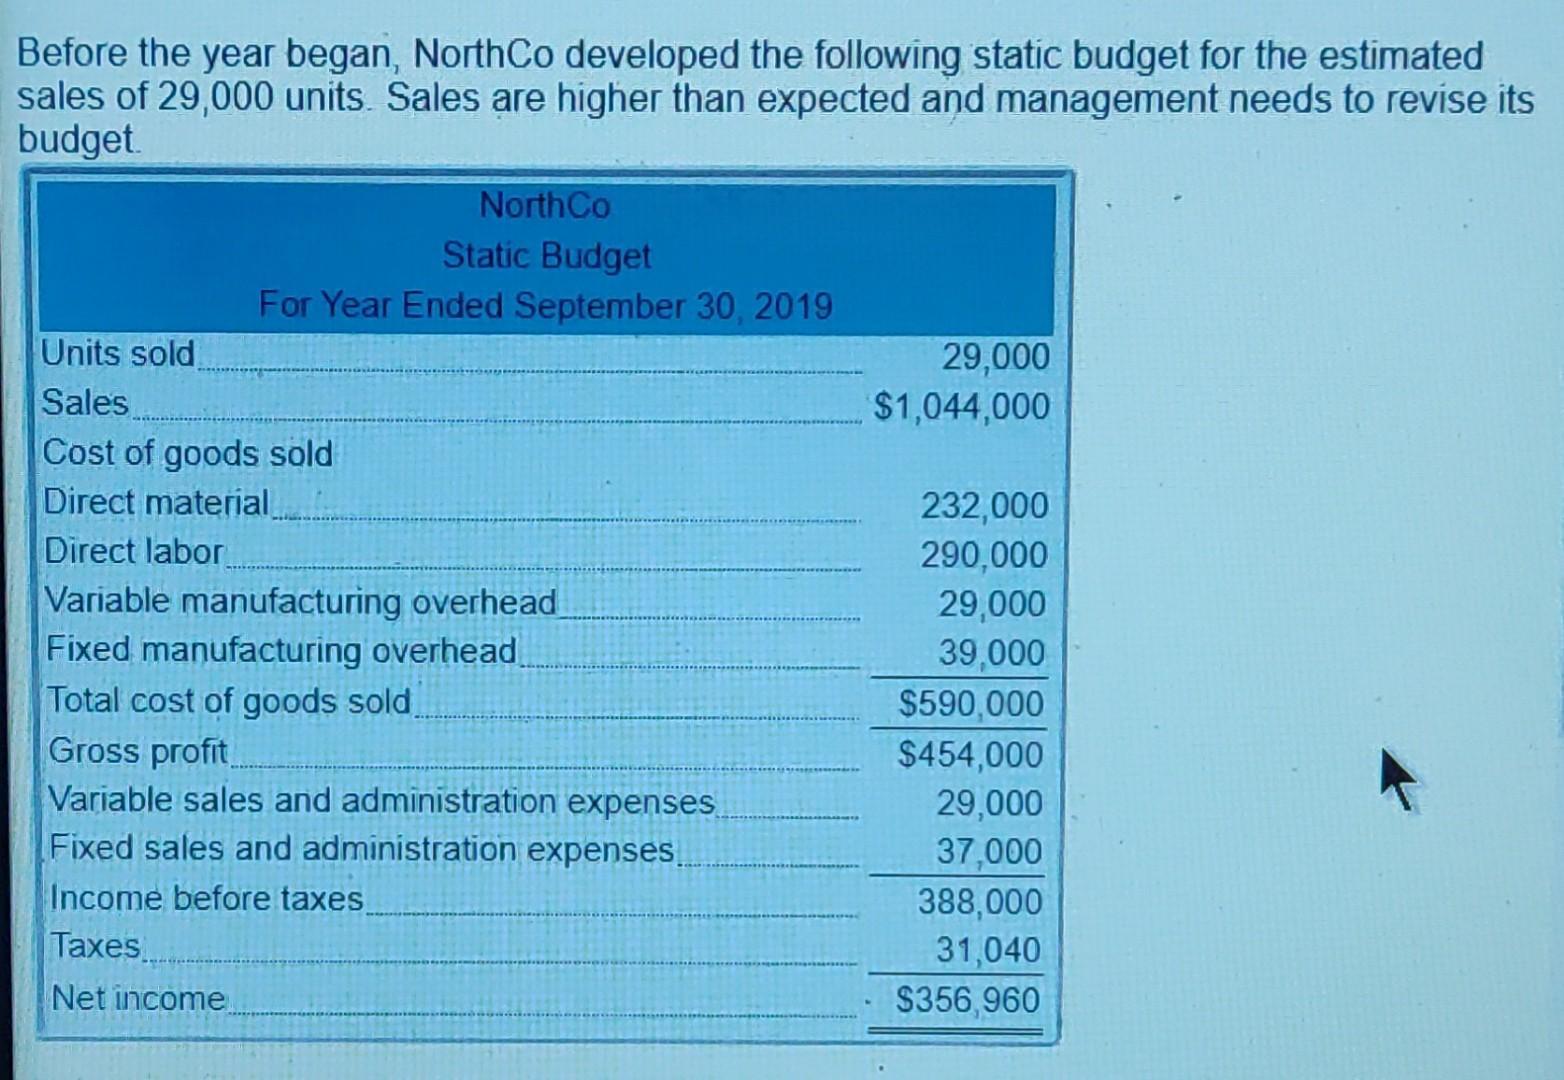 Before the year began, NorthCo developed the following static budget for the estimated sales of 29,000 units.